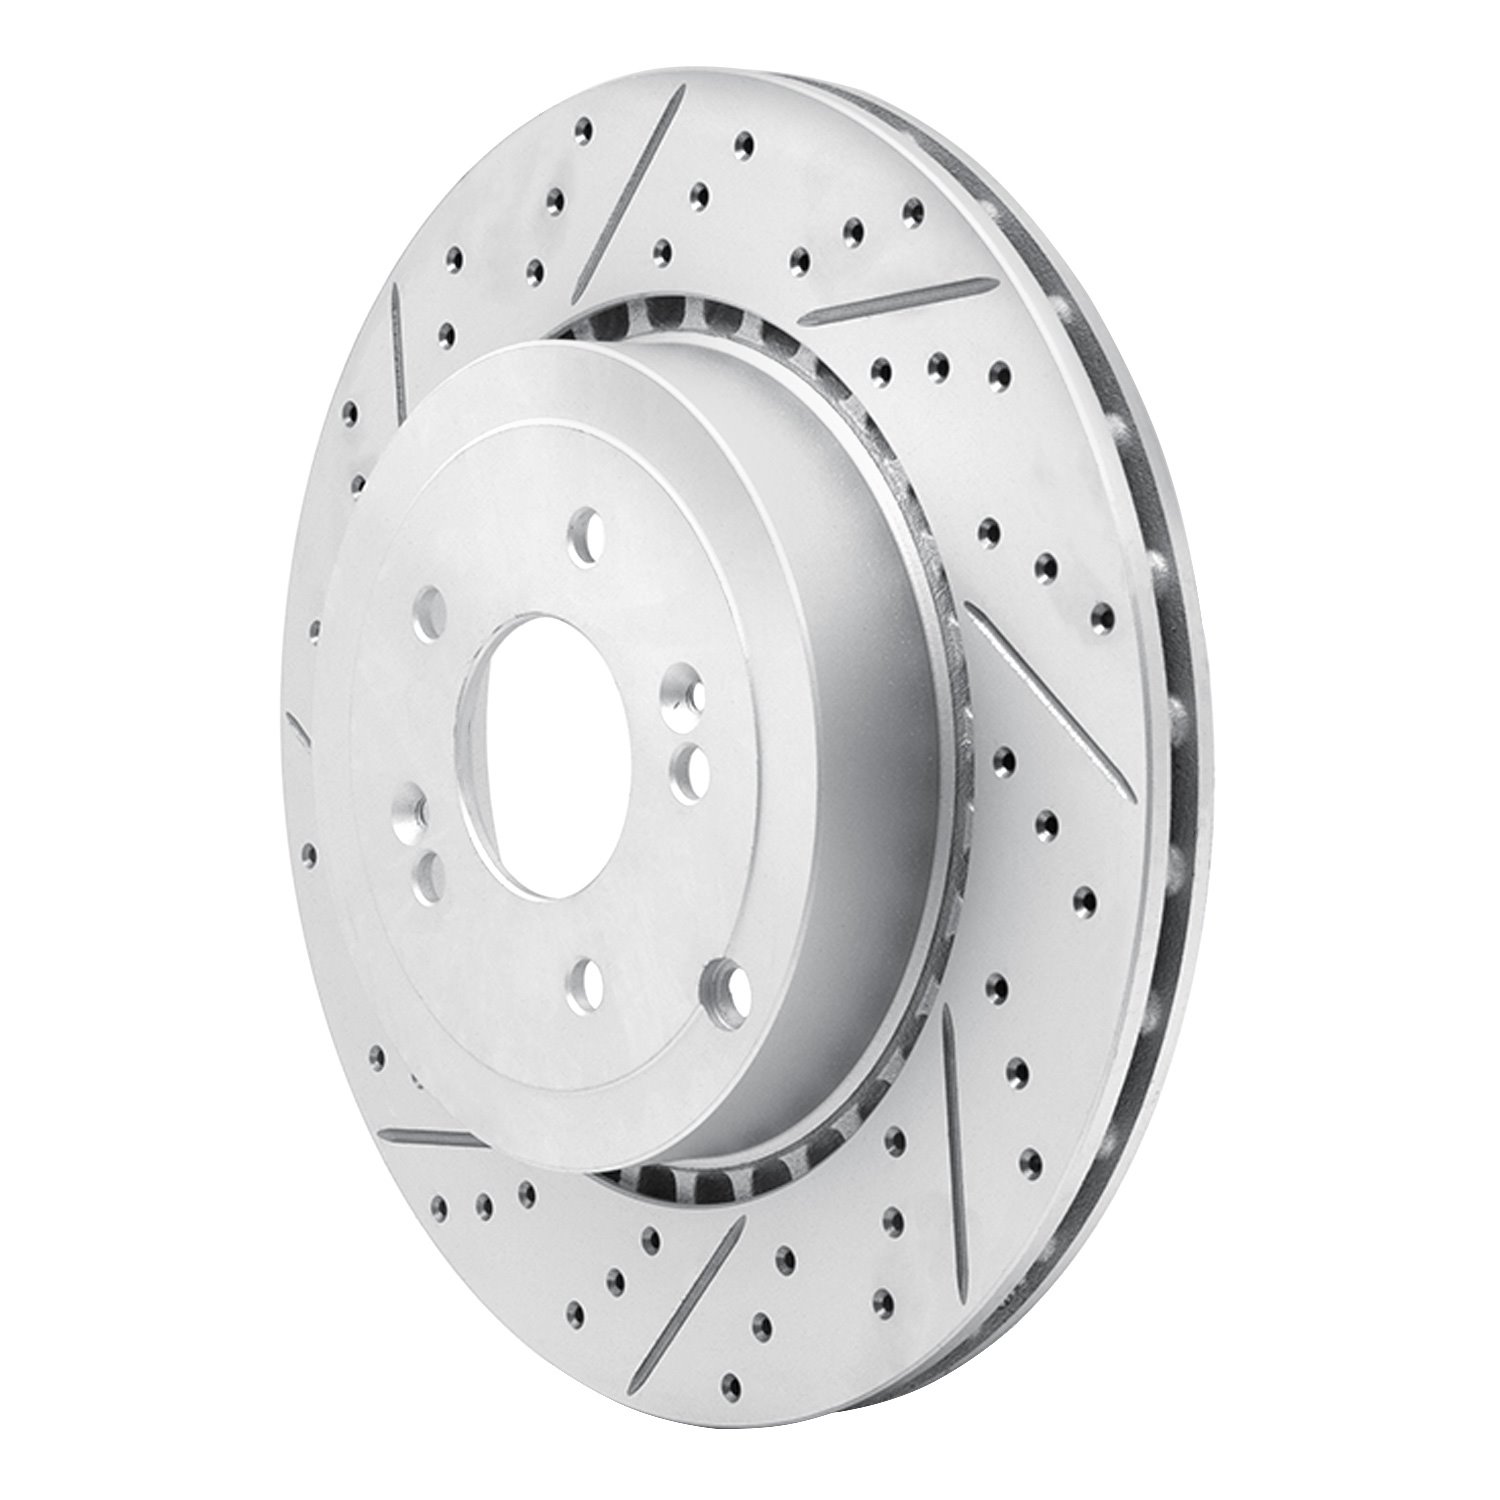 830-21039L Geoperformance Drilled/Slotted Brake Rotor, Fits Select Kia/Hyundai/Genesis, Position: Rear Left